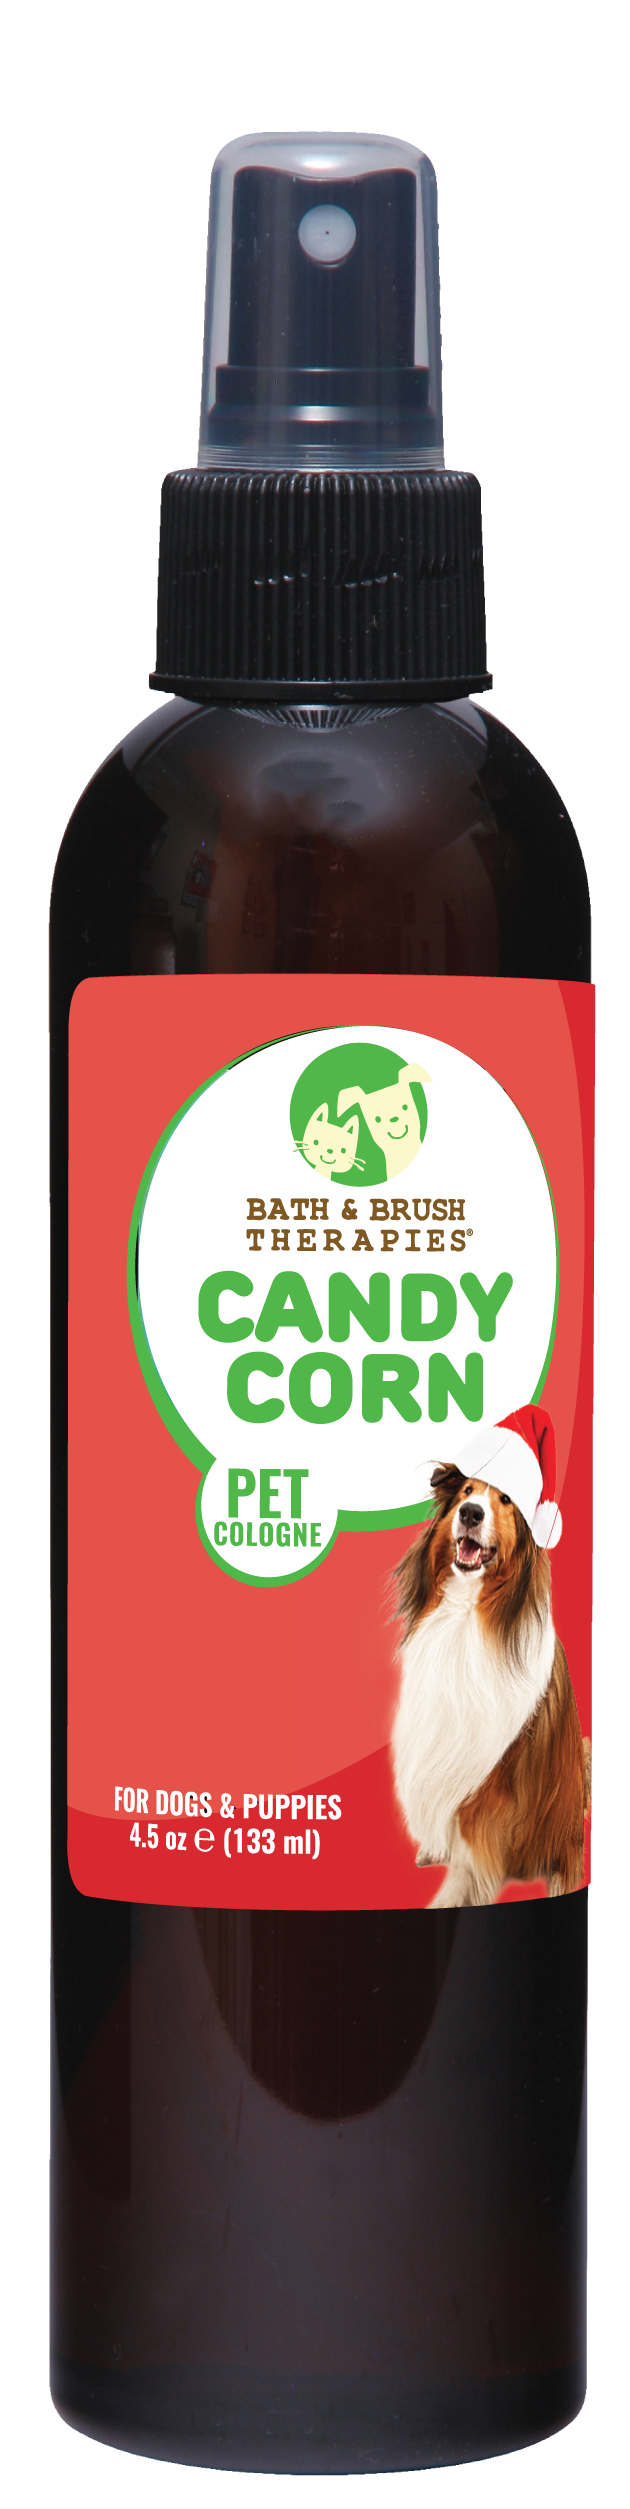 Candy Corn Pet Cologne | Bath & Brush Therapies®